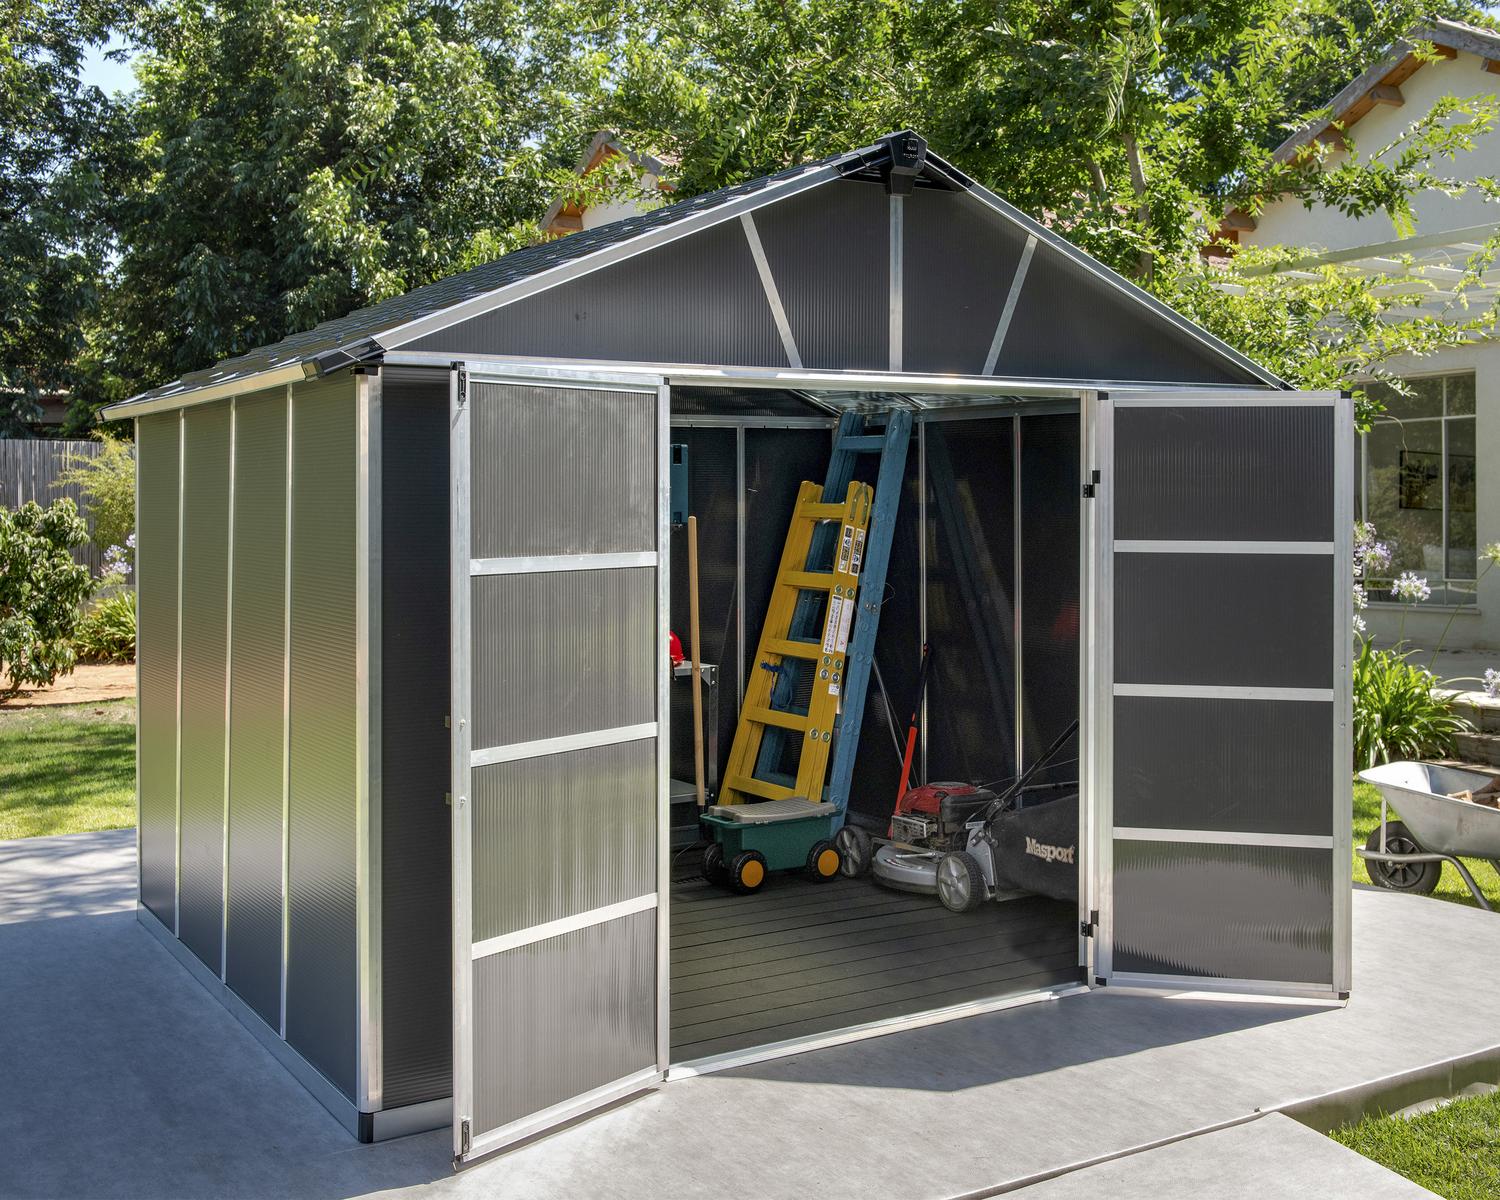 Yukon 11 ft. x 9 ft. Outdoor Plastic Shed with Open Doors Dark Grey Polycarbonate Multiwall and Aluminium Frame